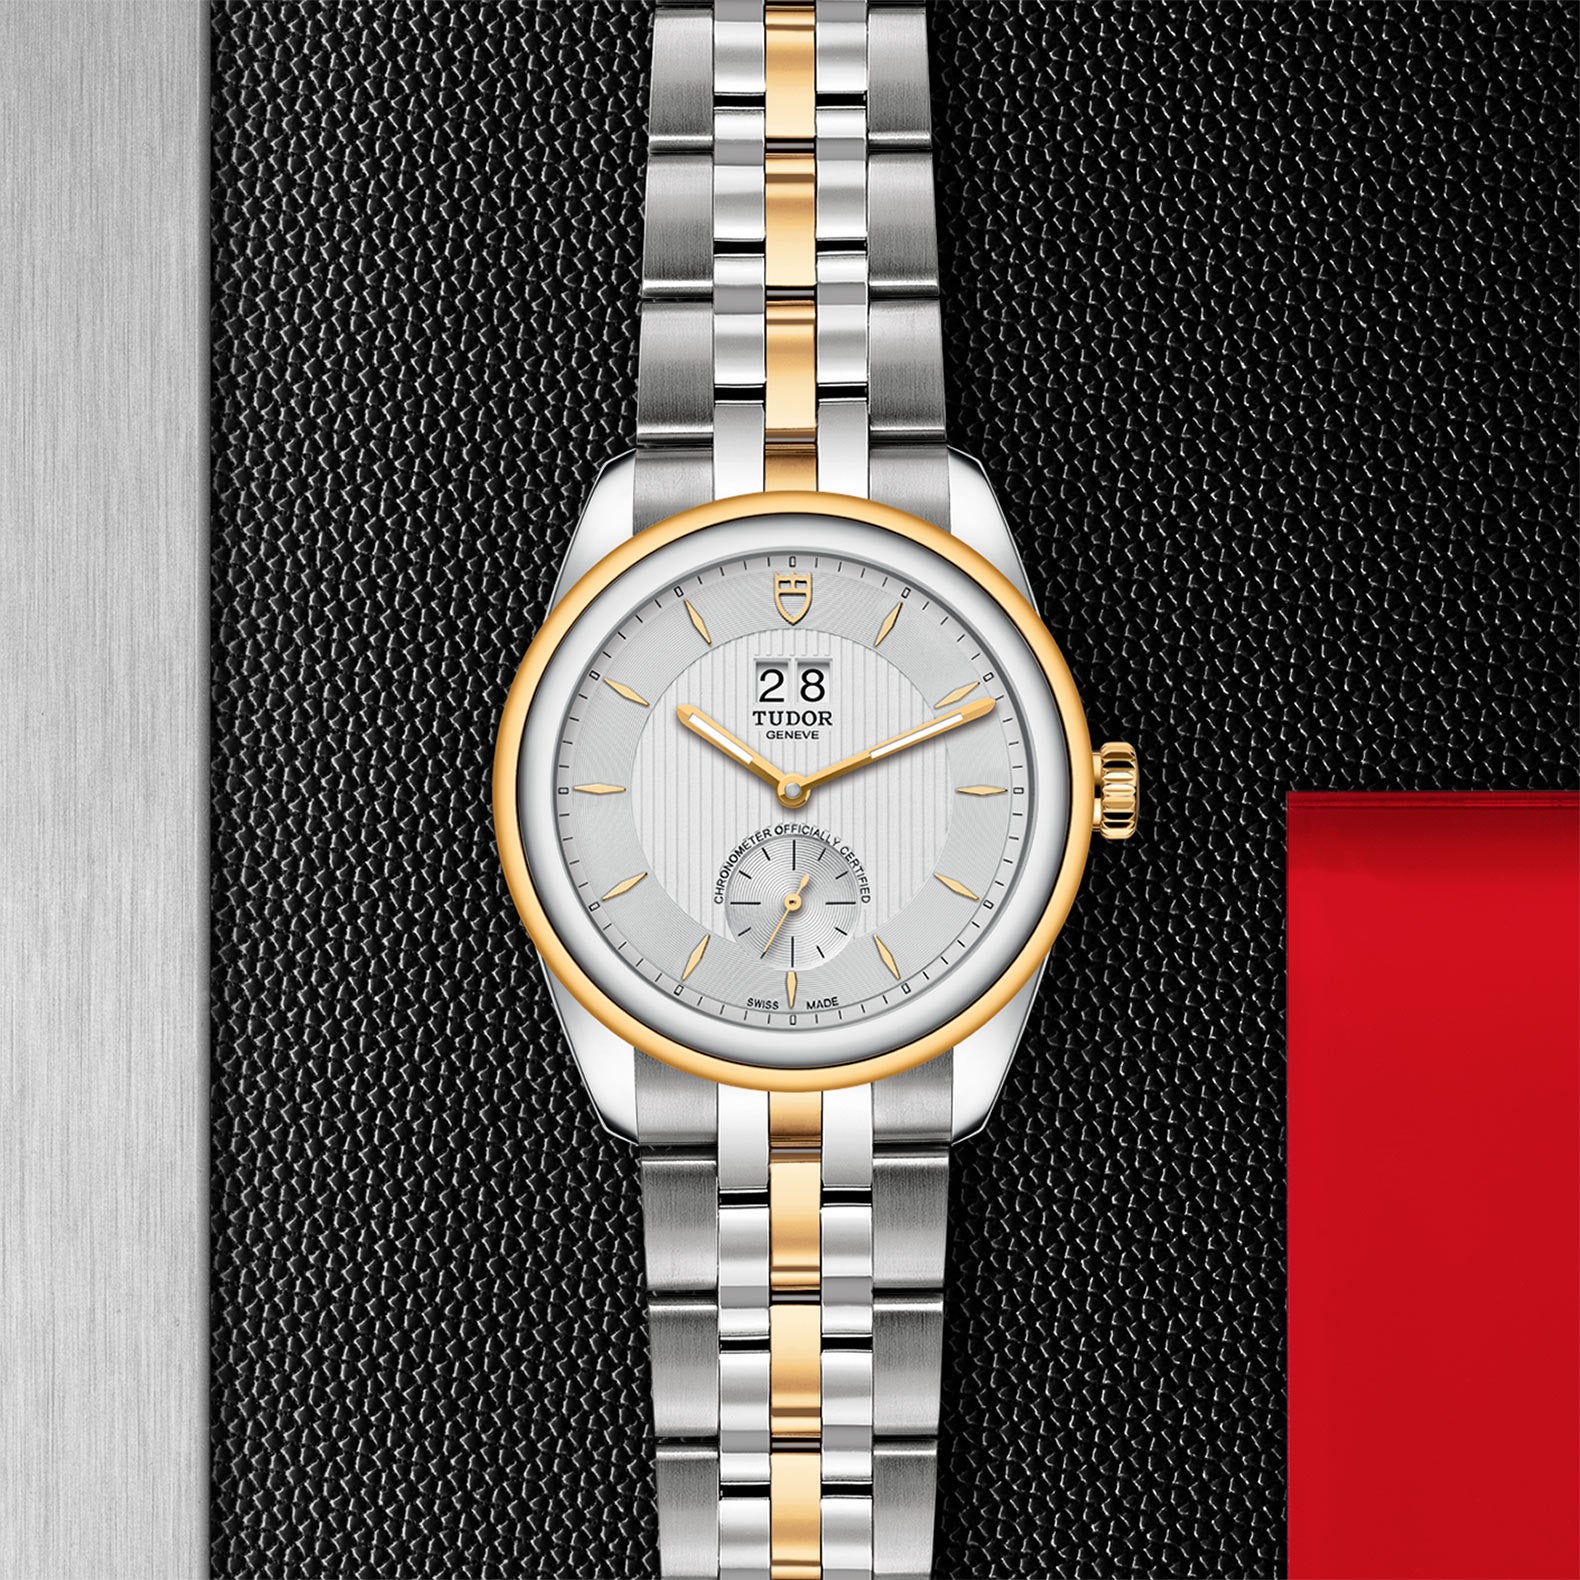 TUDOR Glamour Double Date, model #M57103-0001, at IJL Since 1937